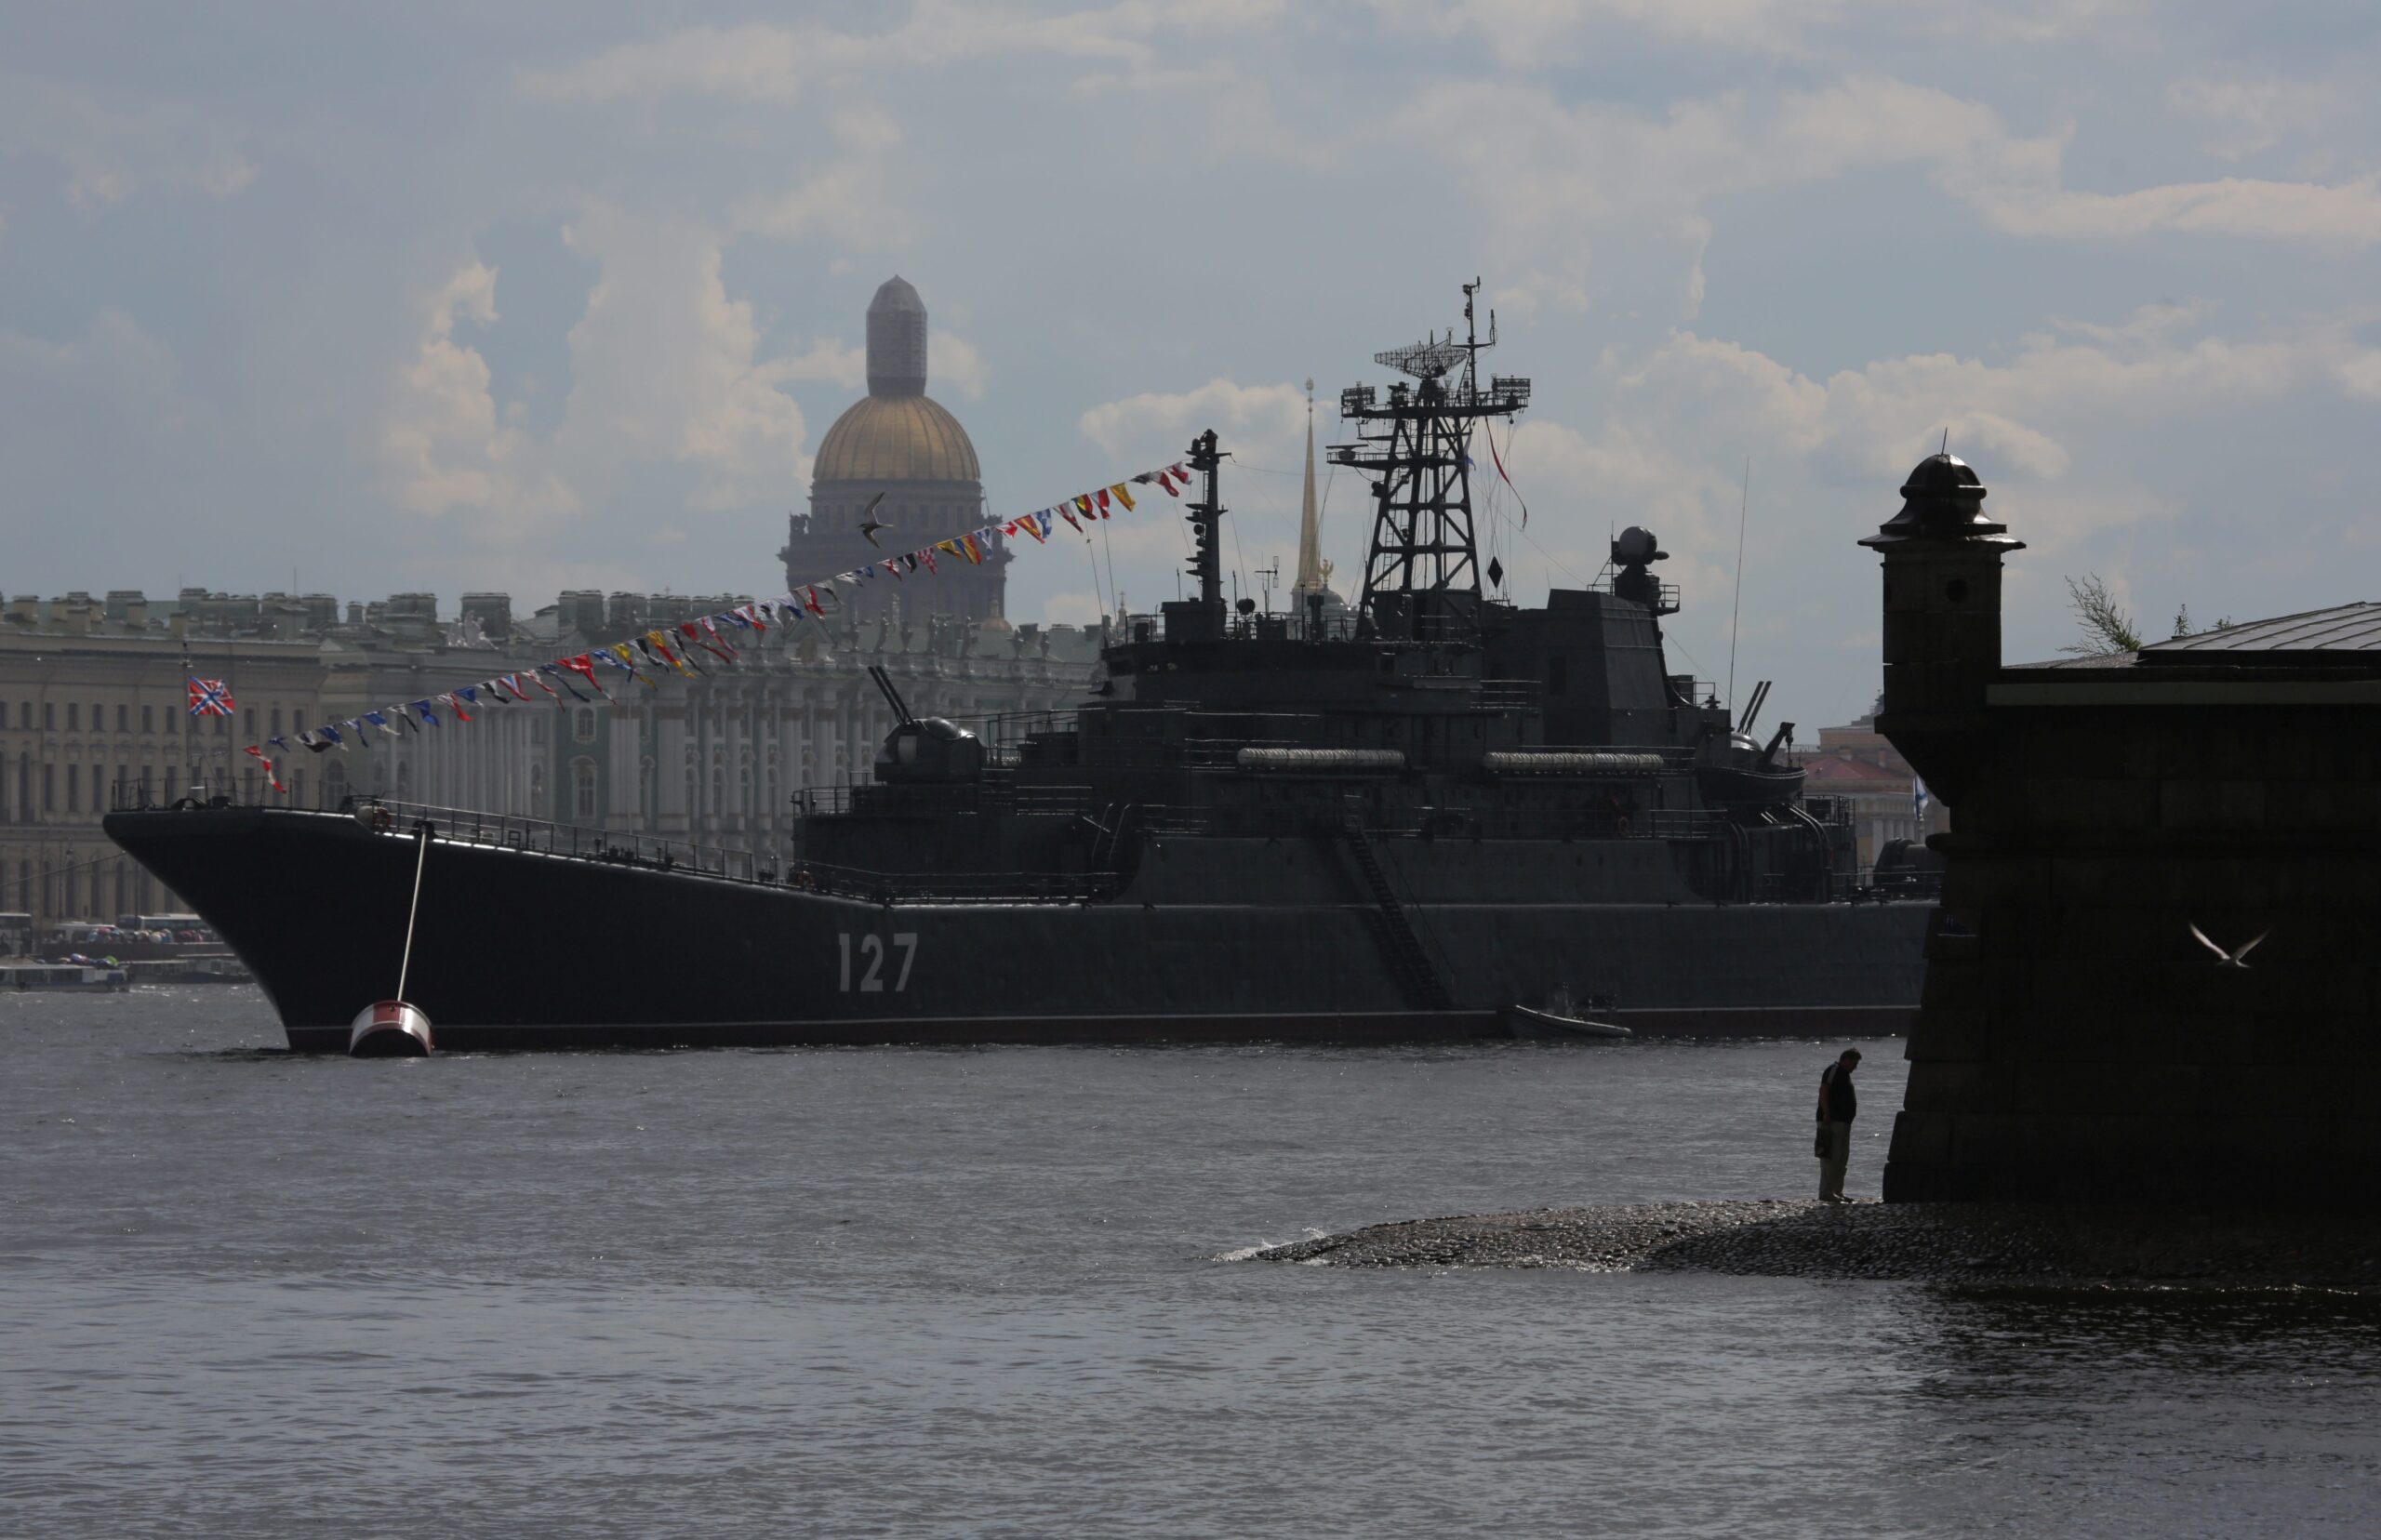 Russian Navy&#39;s large landing ship Minsk is seen in the Neva river, with Saint Isaac&#39;s Cathedral and Hermitage Museum seen in the background, in St. Petersburg, Russia